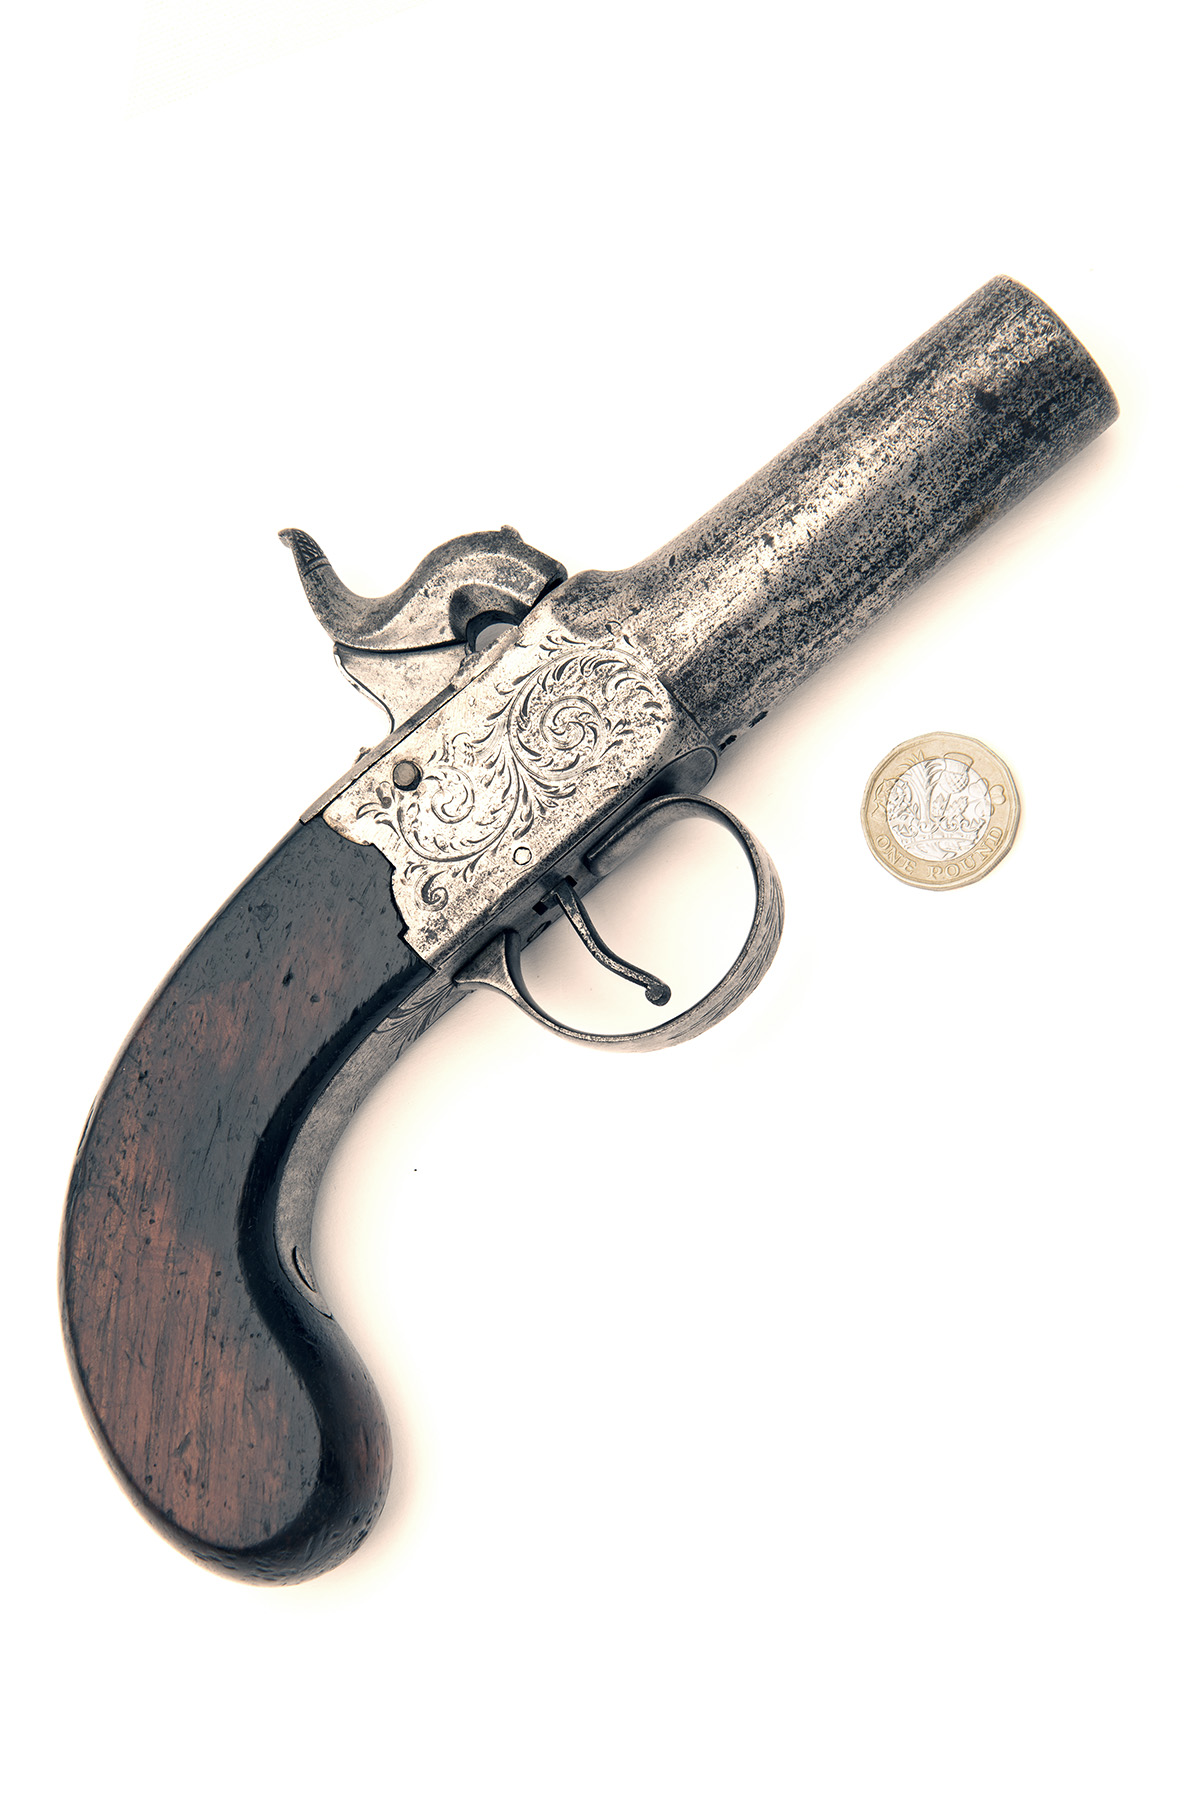 DRURY, LIVERPOOL A RARE OVERSIZED 10-BORE PERCUSSION POCKET-PISTOL, no visible serial number,